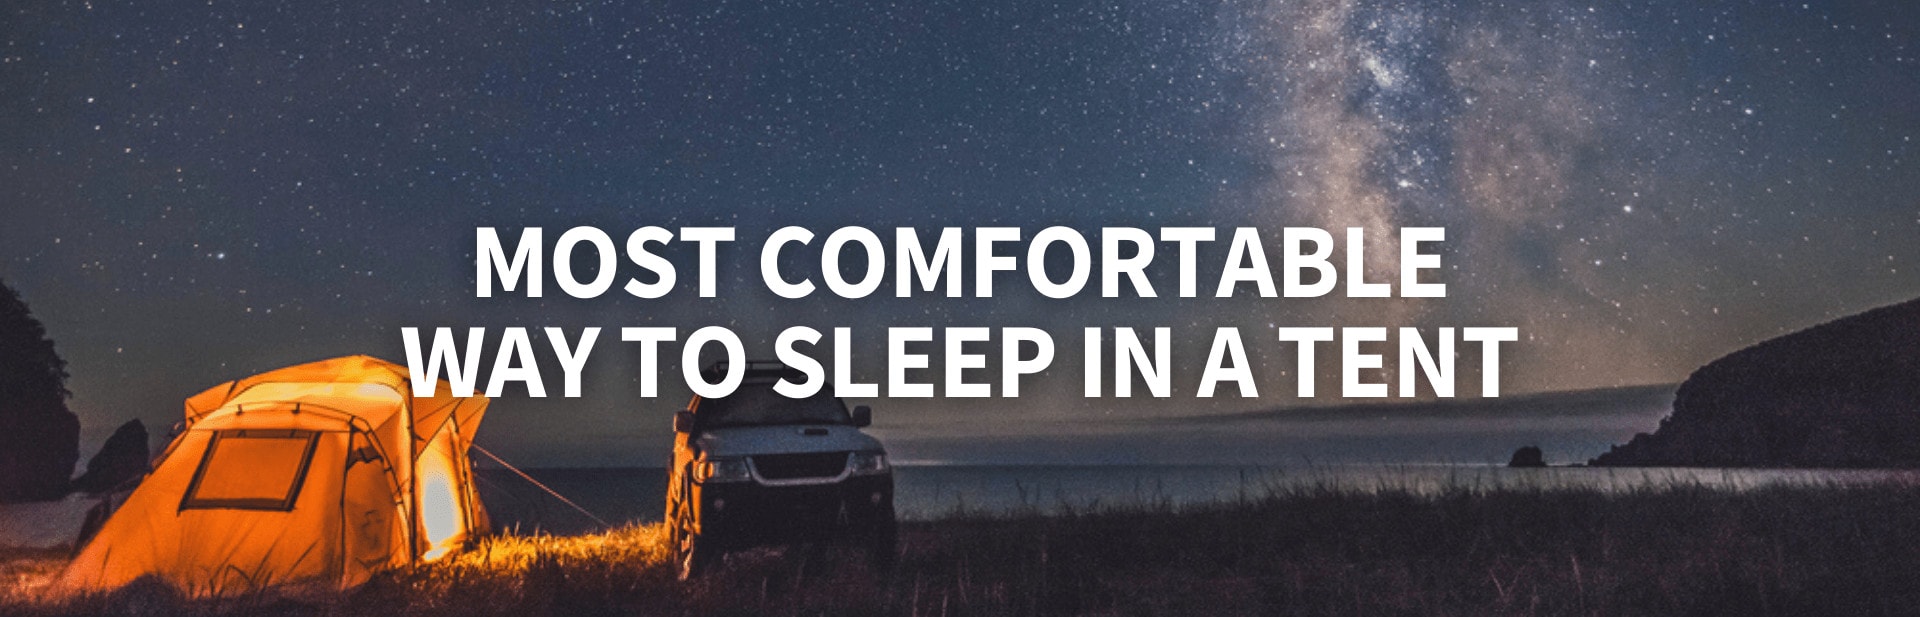 The Most Comfortable Way to Sleep in a Tent: 11 Tips to Catch Some Zzzs Outside